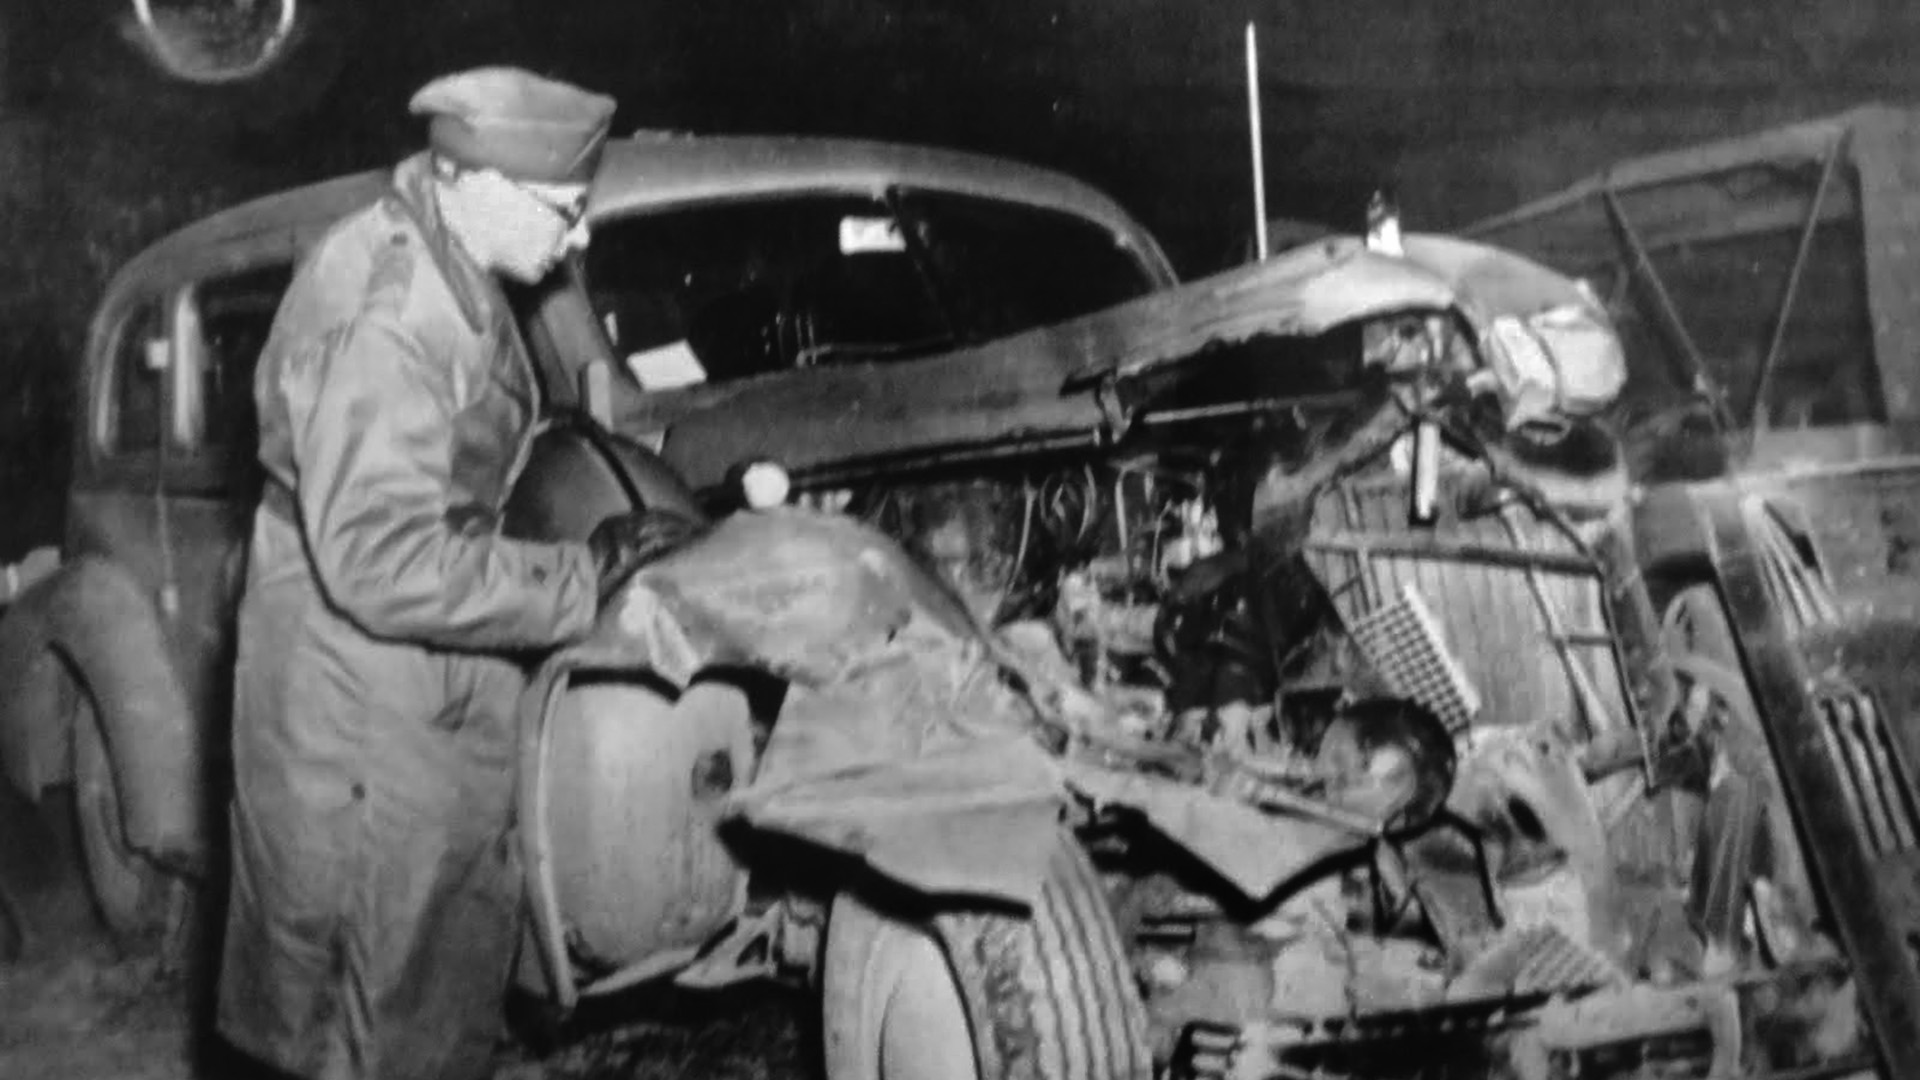 General George S. Patton’s vehicle was hit by an Army truck on December 9, 1945. Investigators considered the accident trivial, but Patton later died from his injuries, fueling conspiracy theories.